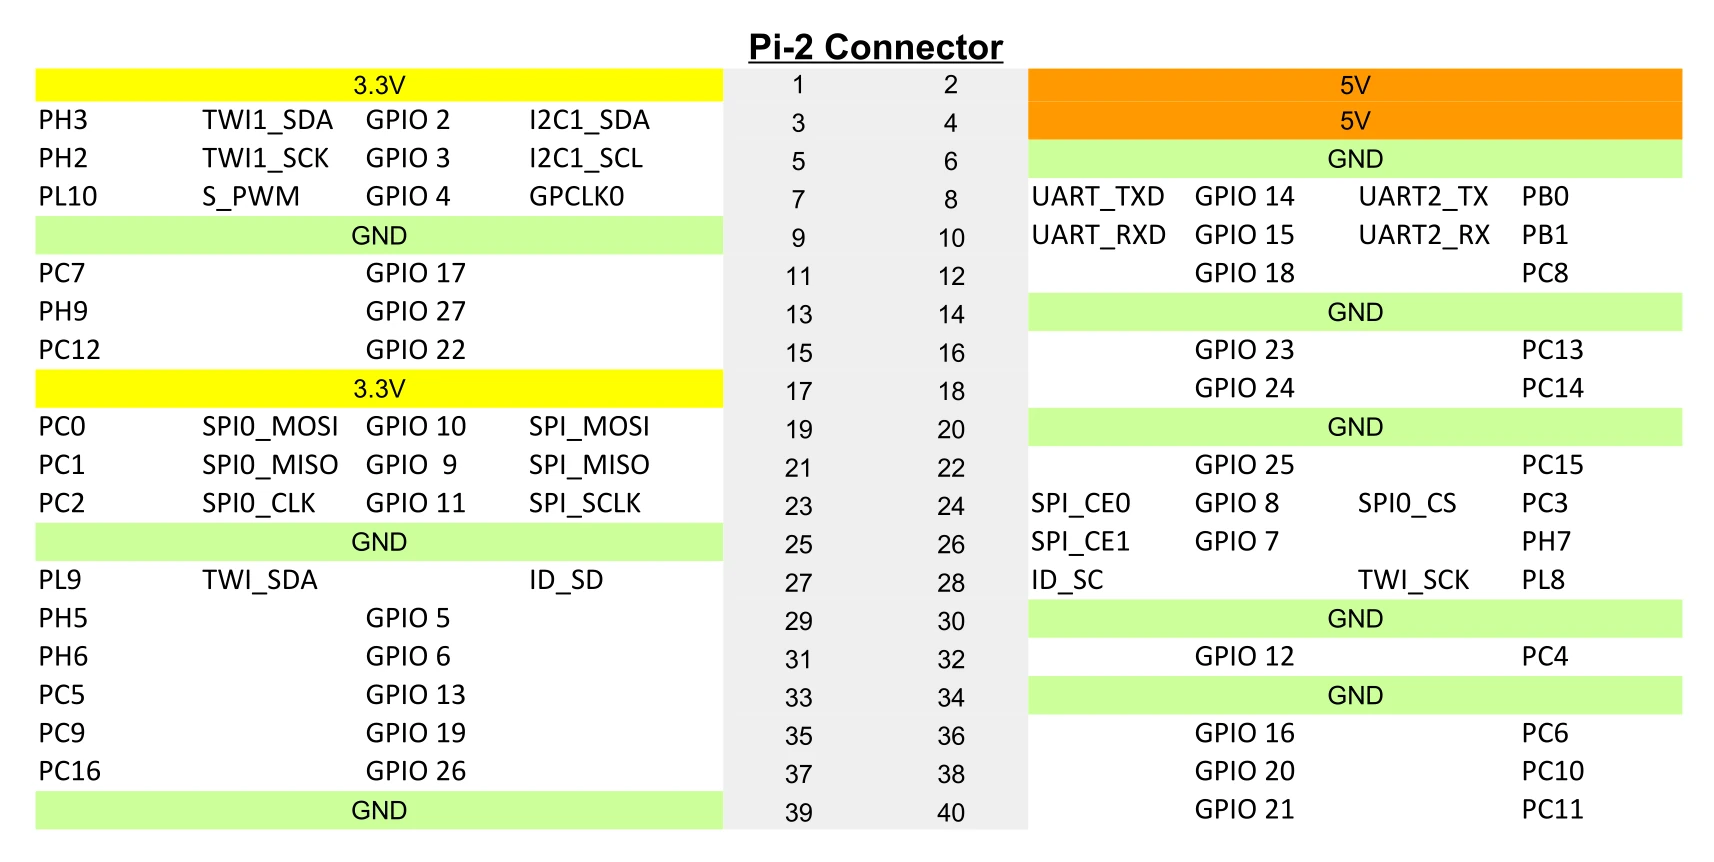 Pin assignment Pi-2 on the Pine64-LTS